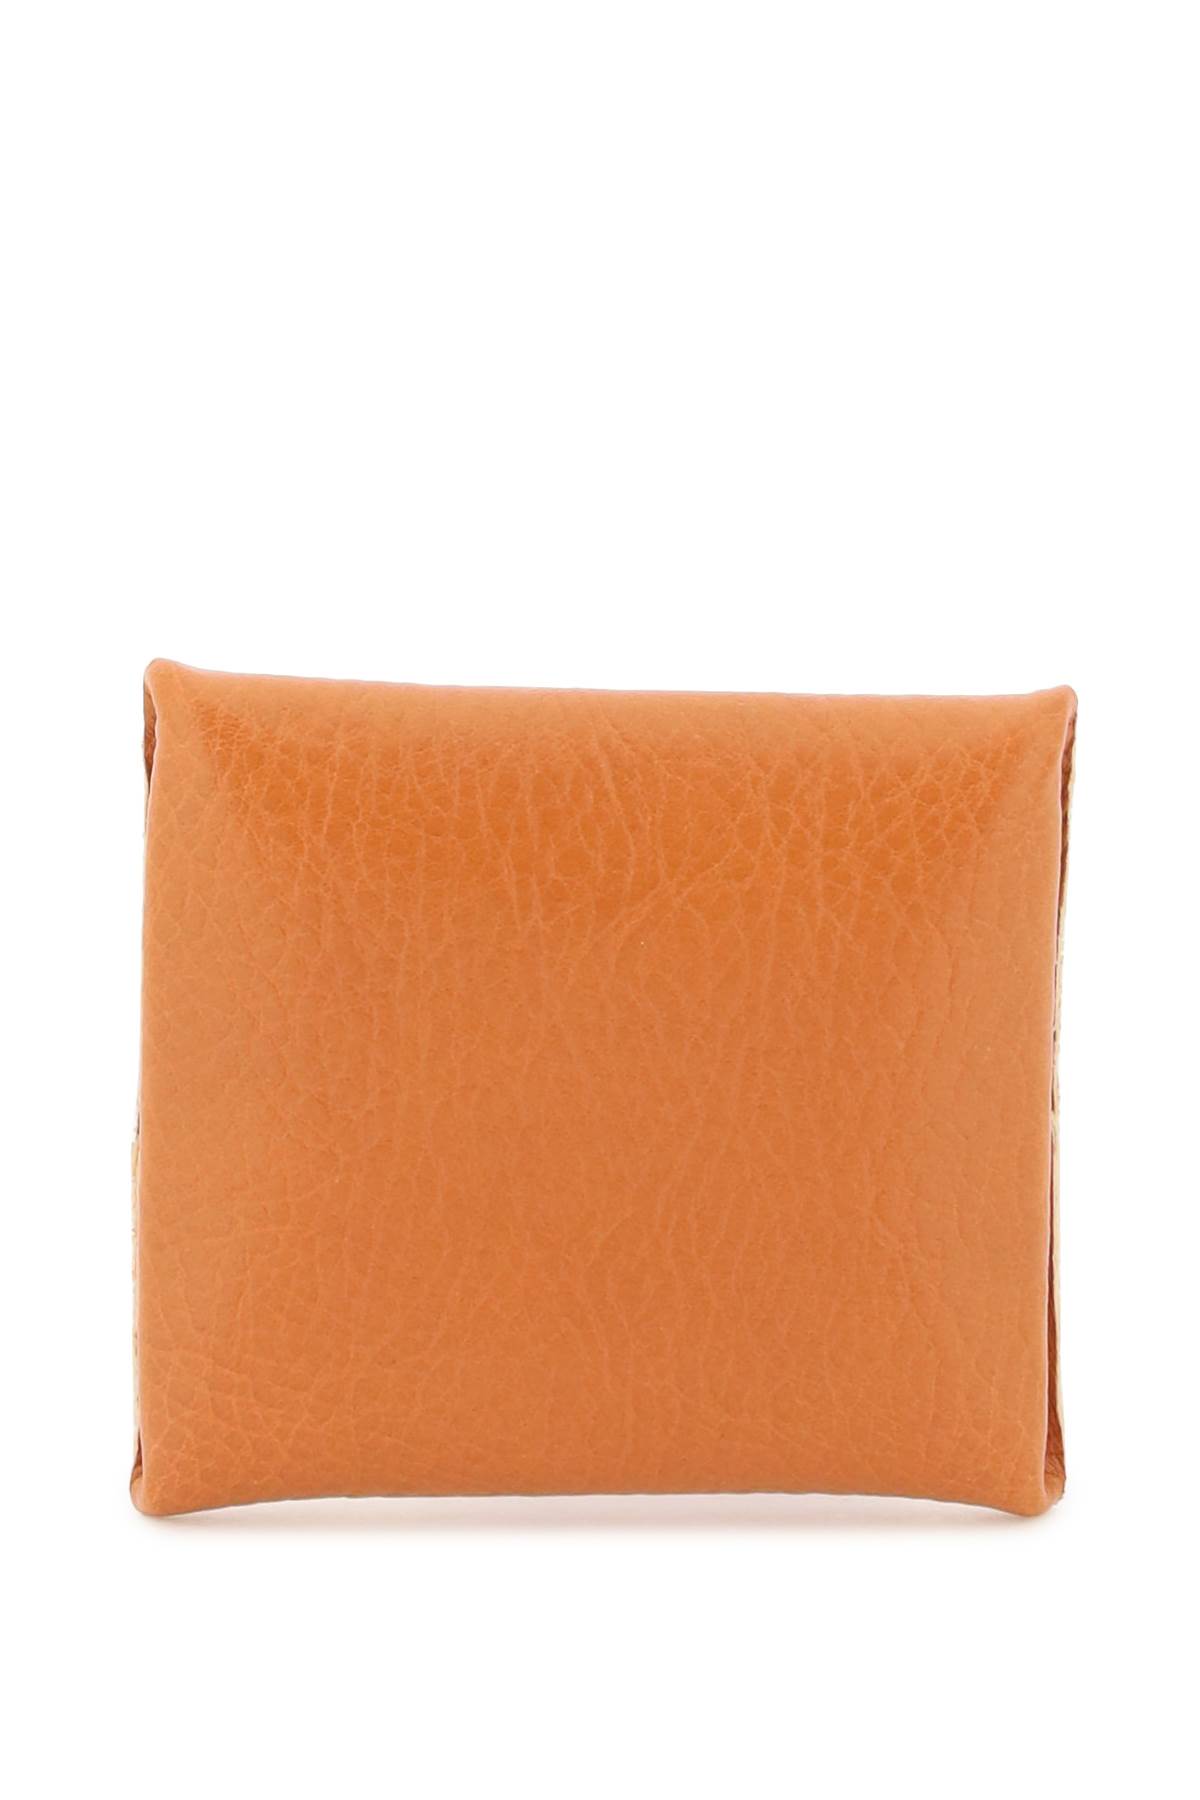 Women's coin purse in calf leather color caramel – Il Bisonte